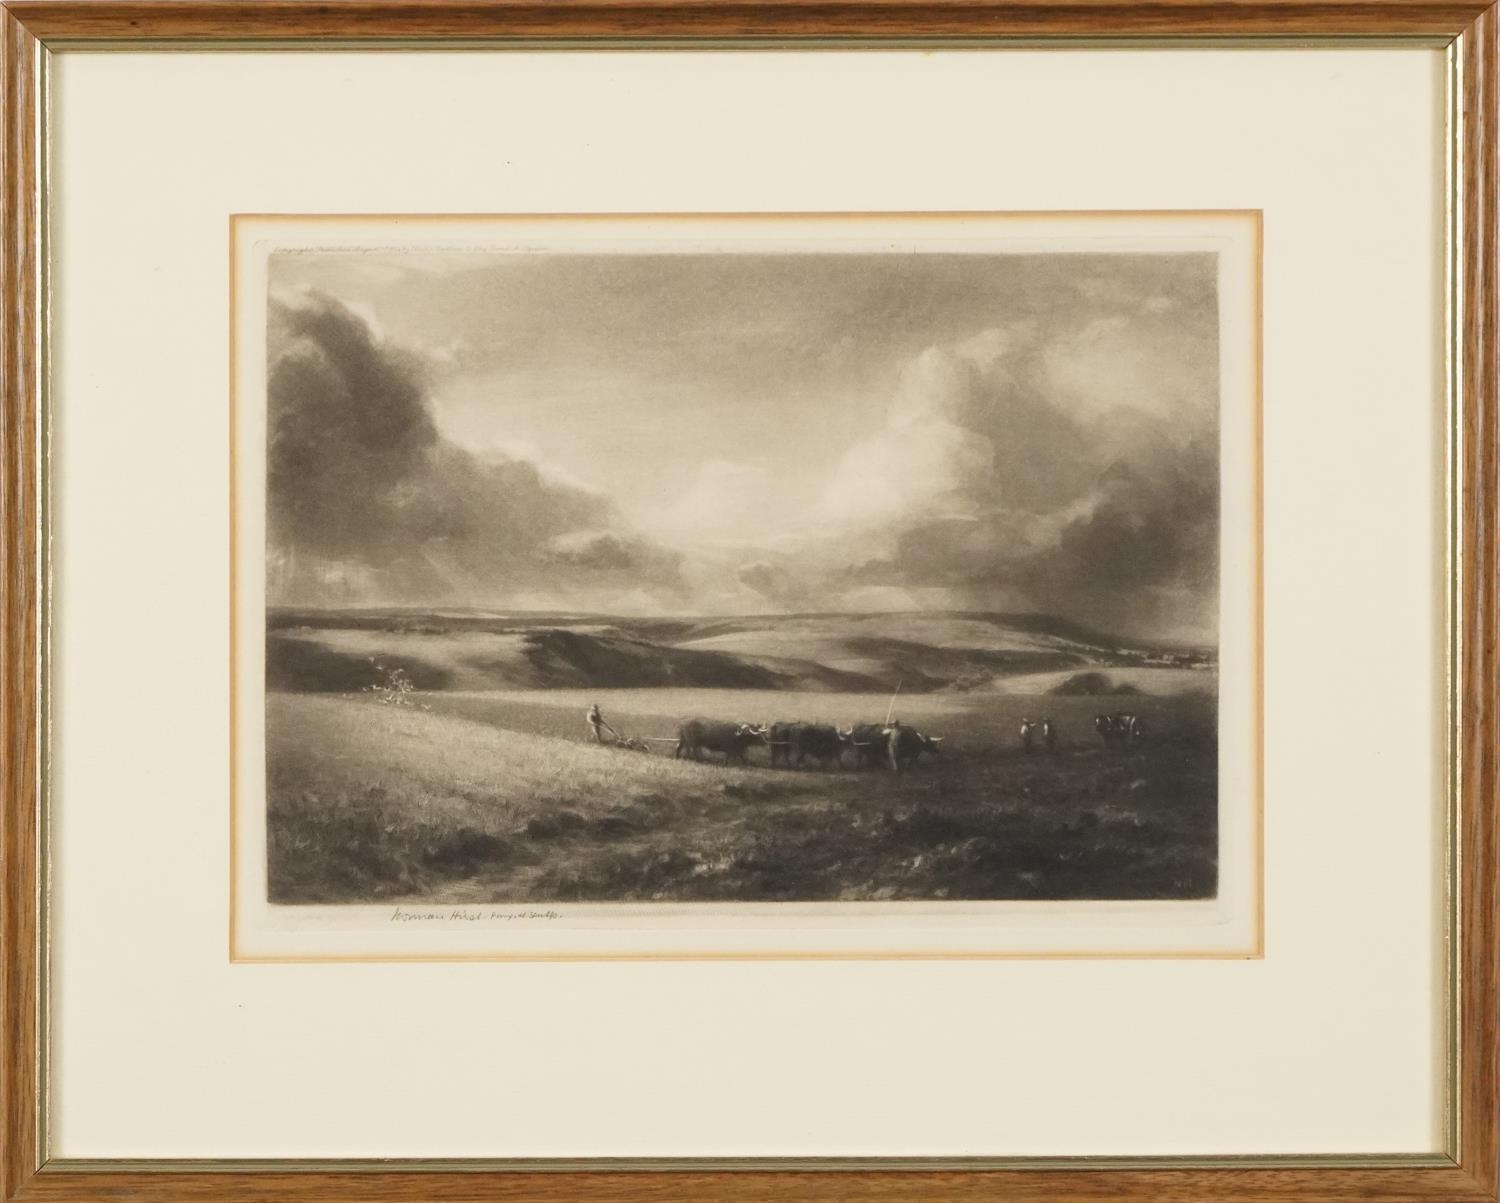 Norman Hirst - Ploughing in a field with Oxon , pencil signed mezzotint, copyright published - Image 2 of 6